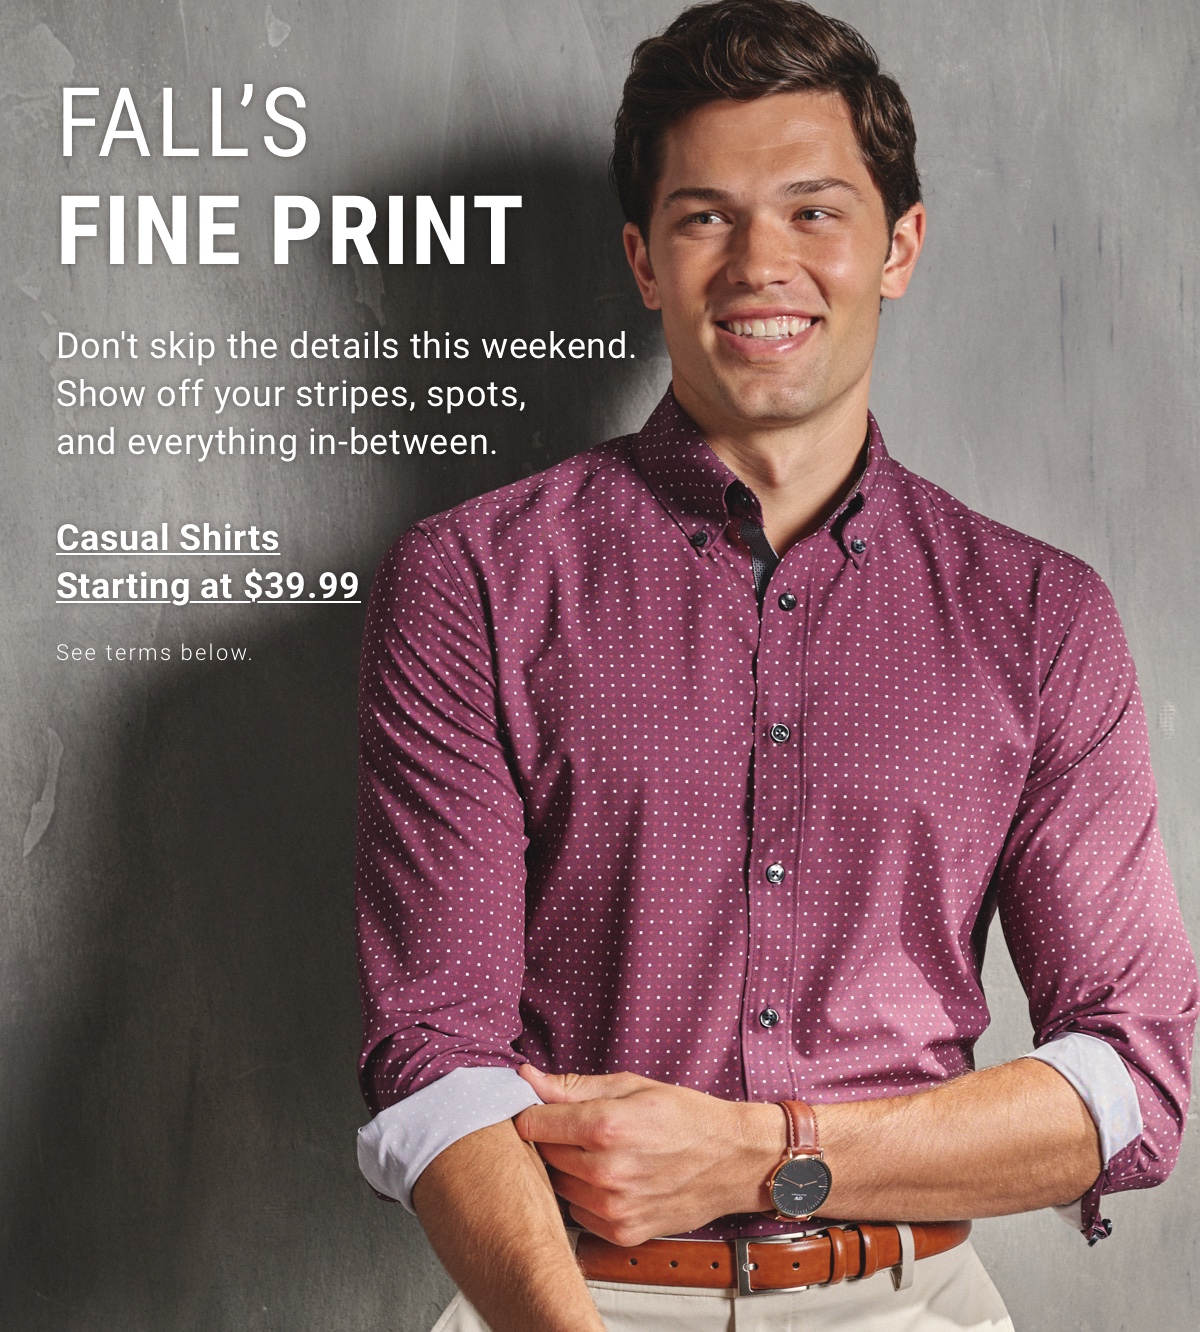 FALL S FINE PRINT | Don t skip the details this weekend. Show off your stripes, spots, and everything in-between. | Casual Shirts Starting at $39.99